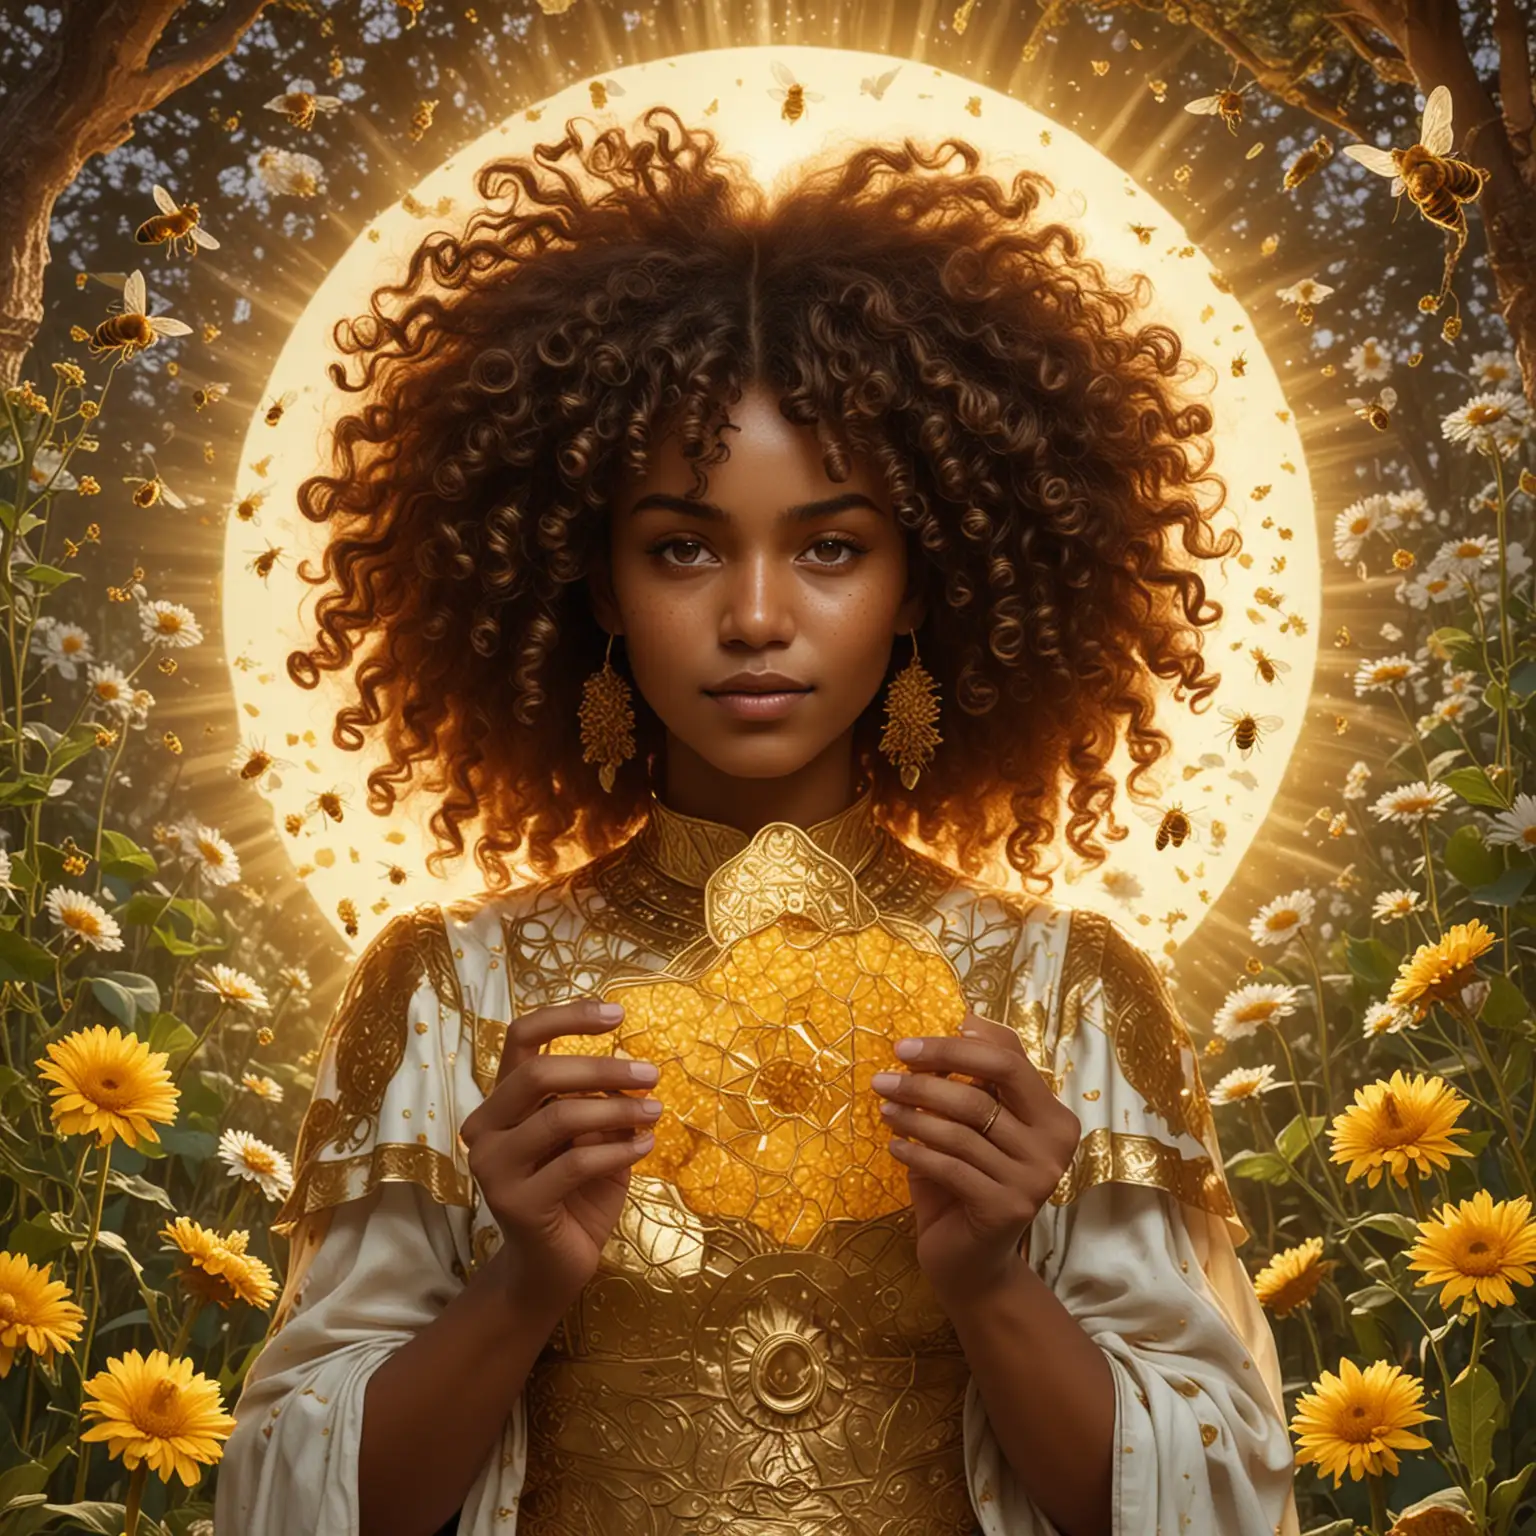 Create a tarot card that represents the sun card, with an Afro-Indigenous woman standing in a beam of sunlight, eating a piece of honeycom, with her hands. She has naturally curly hair and is dressed in gold and white with a enchanted garden full of honeybees